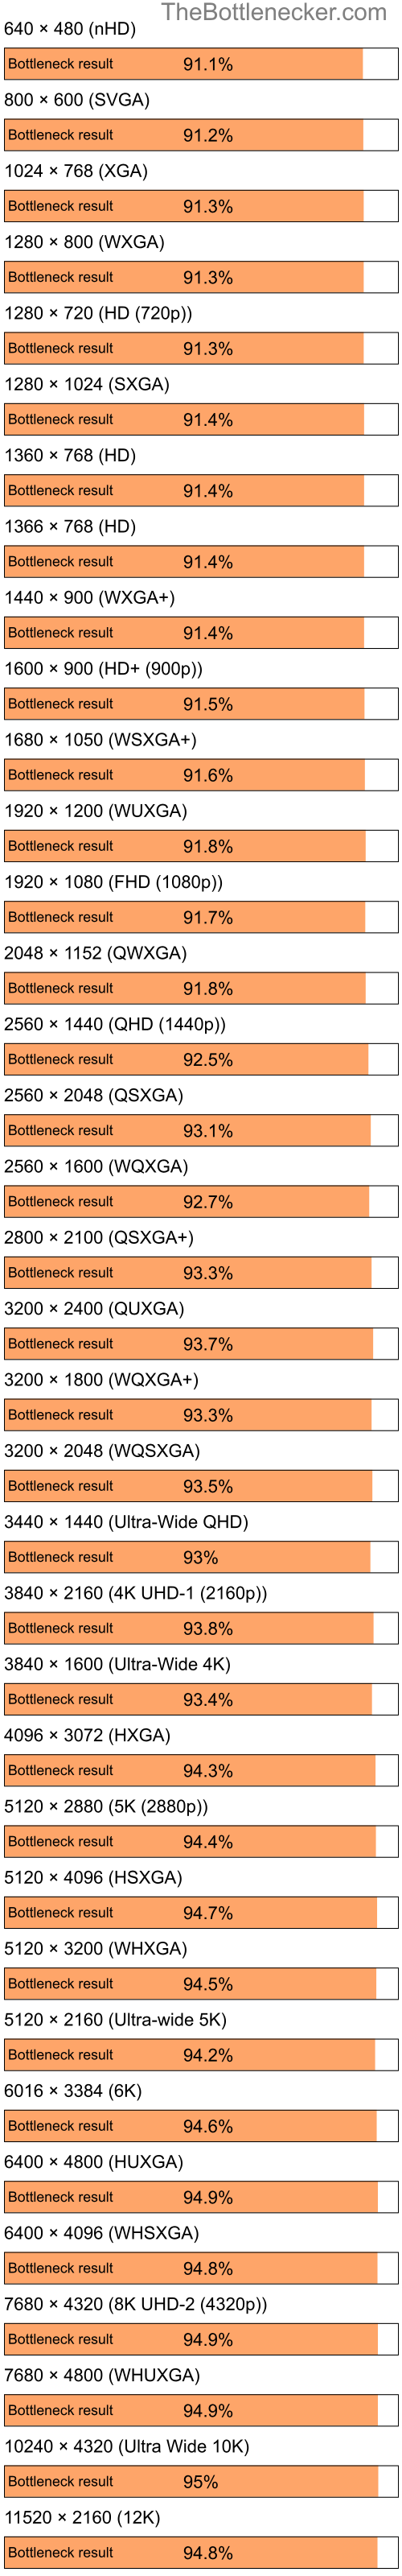 Bottleneck results by resolution for Intel Celeron M 420 and NVIDIA GeForce4 Ti 4200 in Graphic Card Intense Tasks